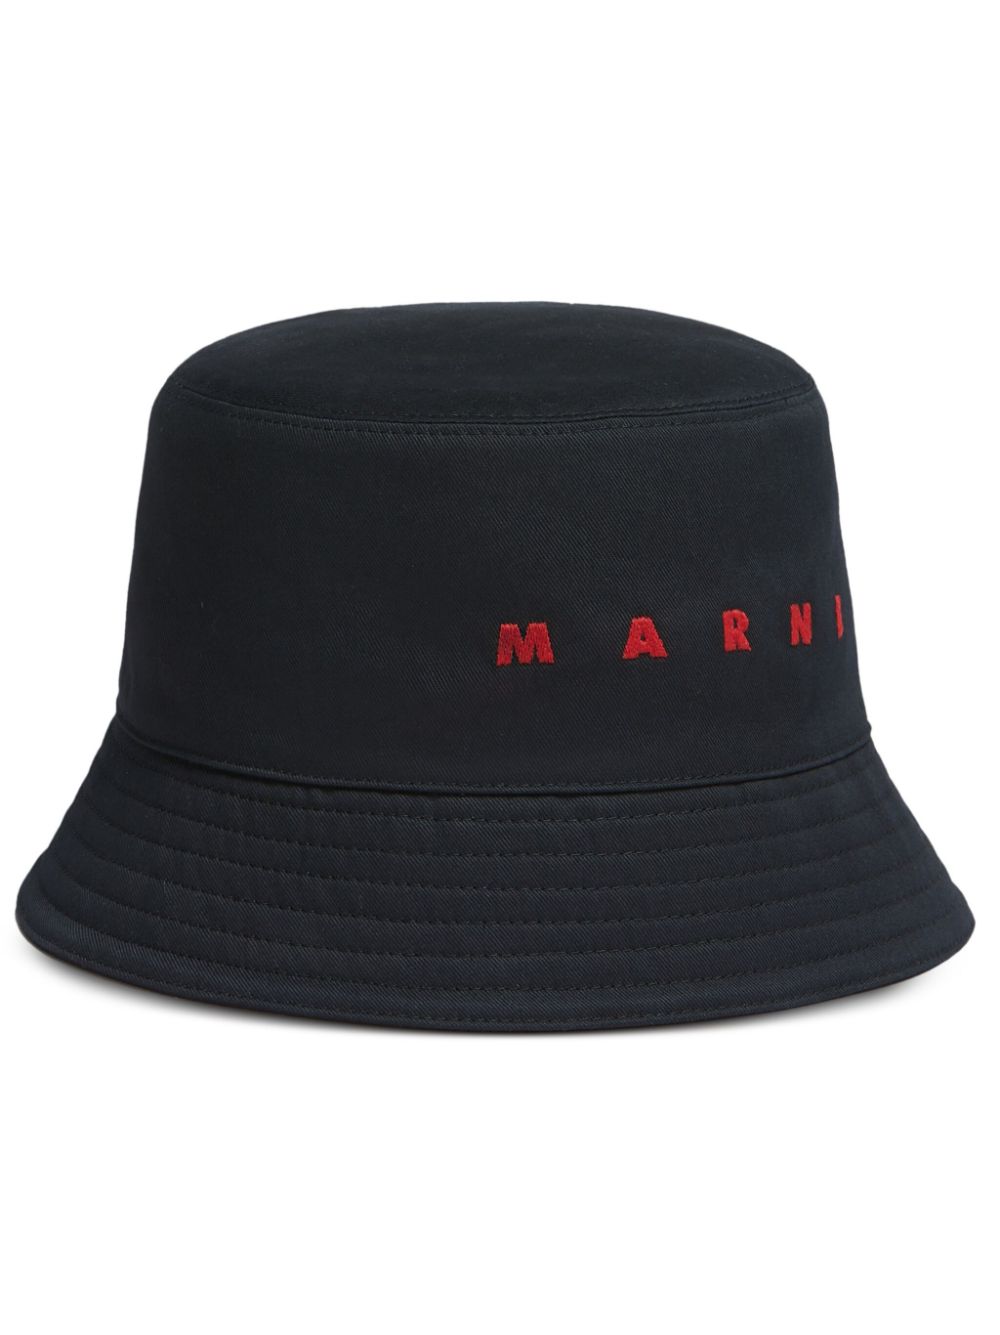 Marni Logo-embroidered Bucket Hat In Black